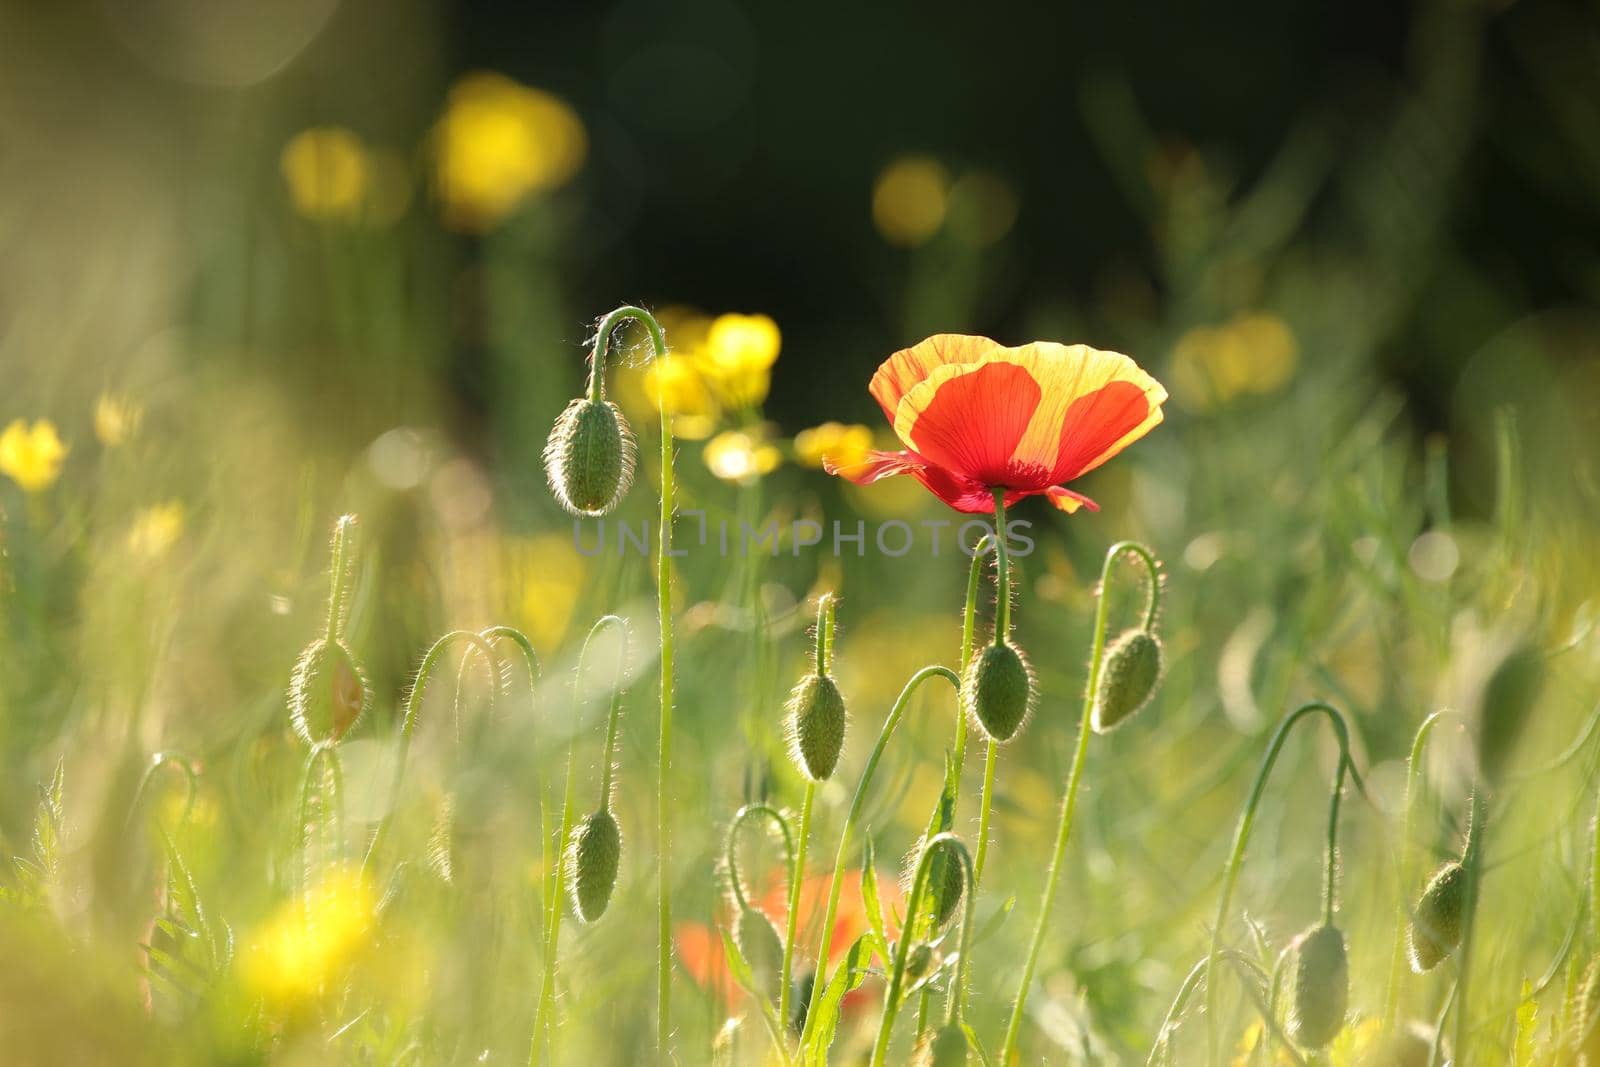 Poppy in the field at dawn.